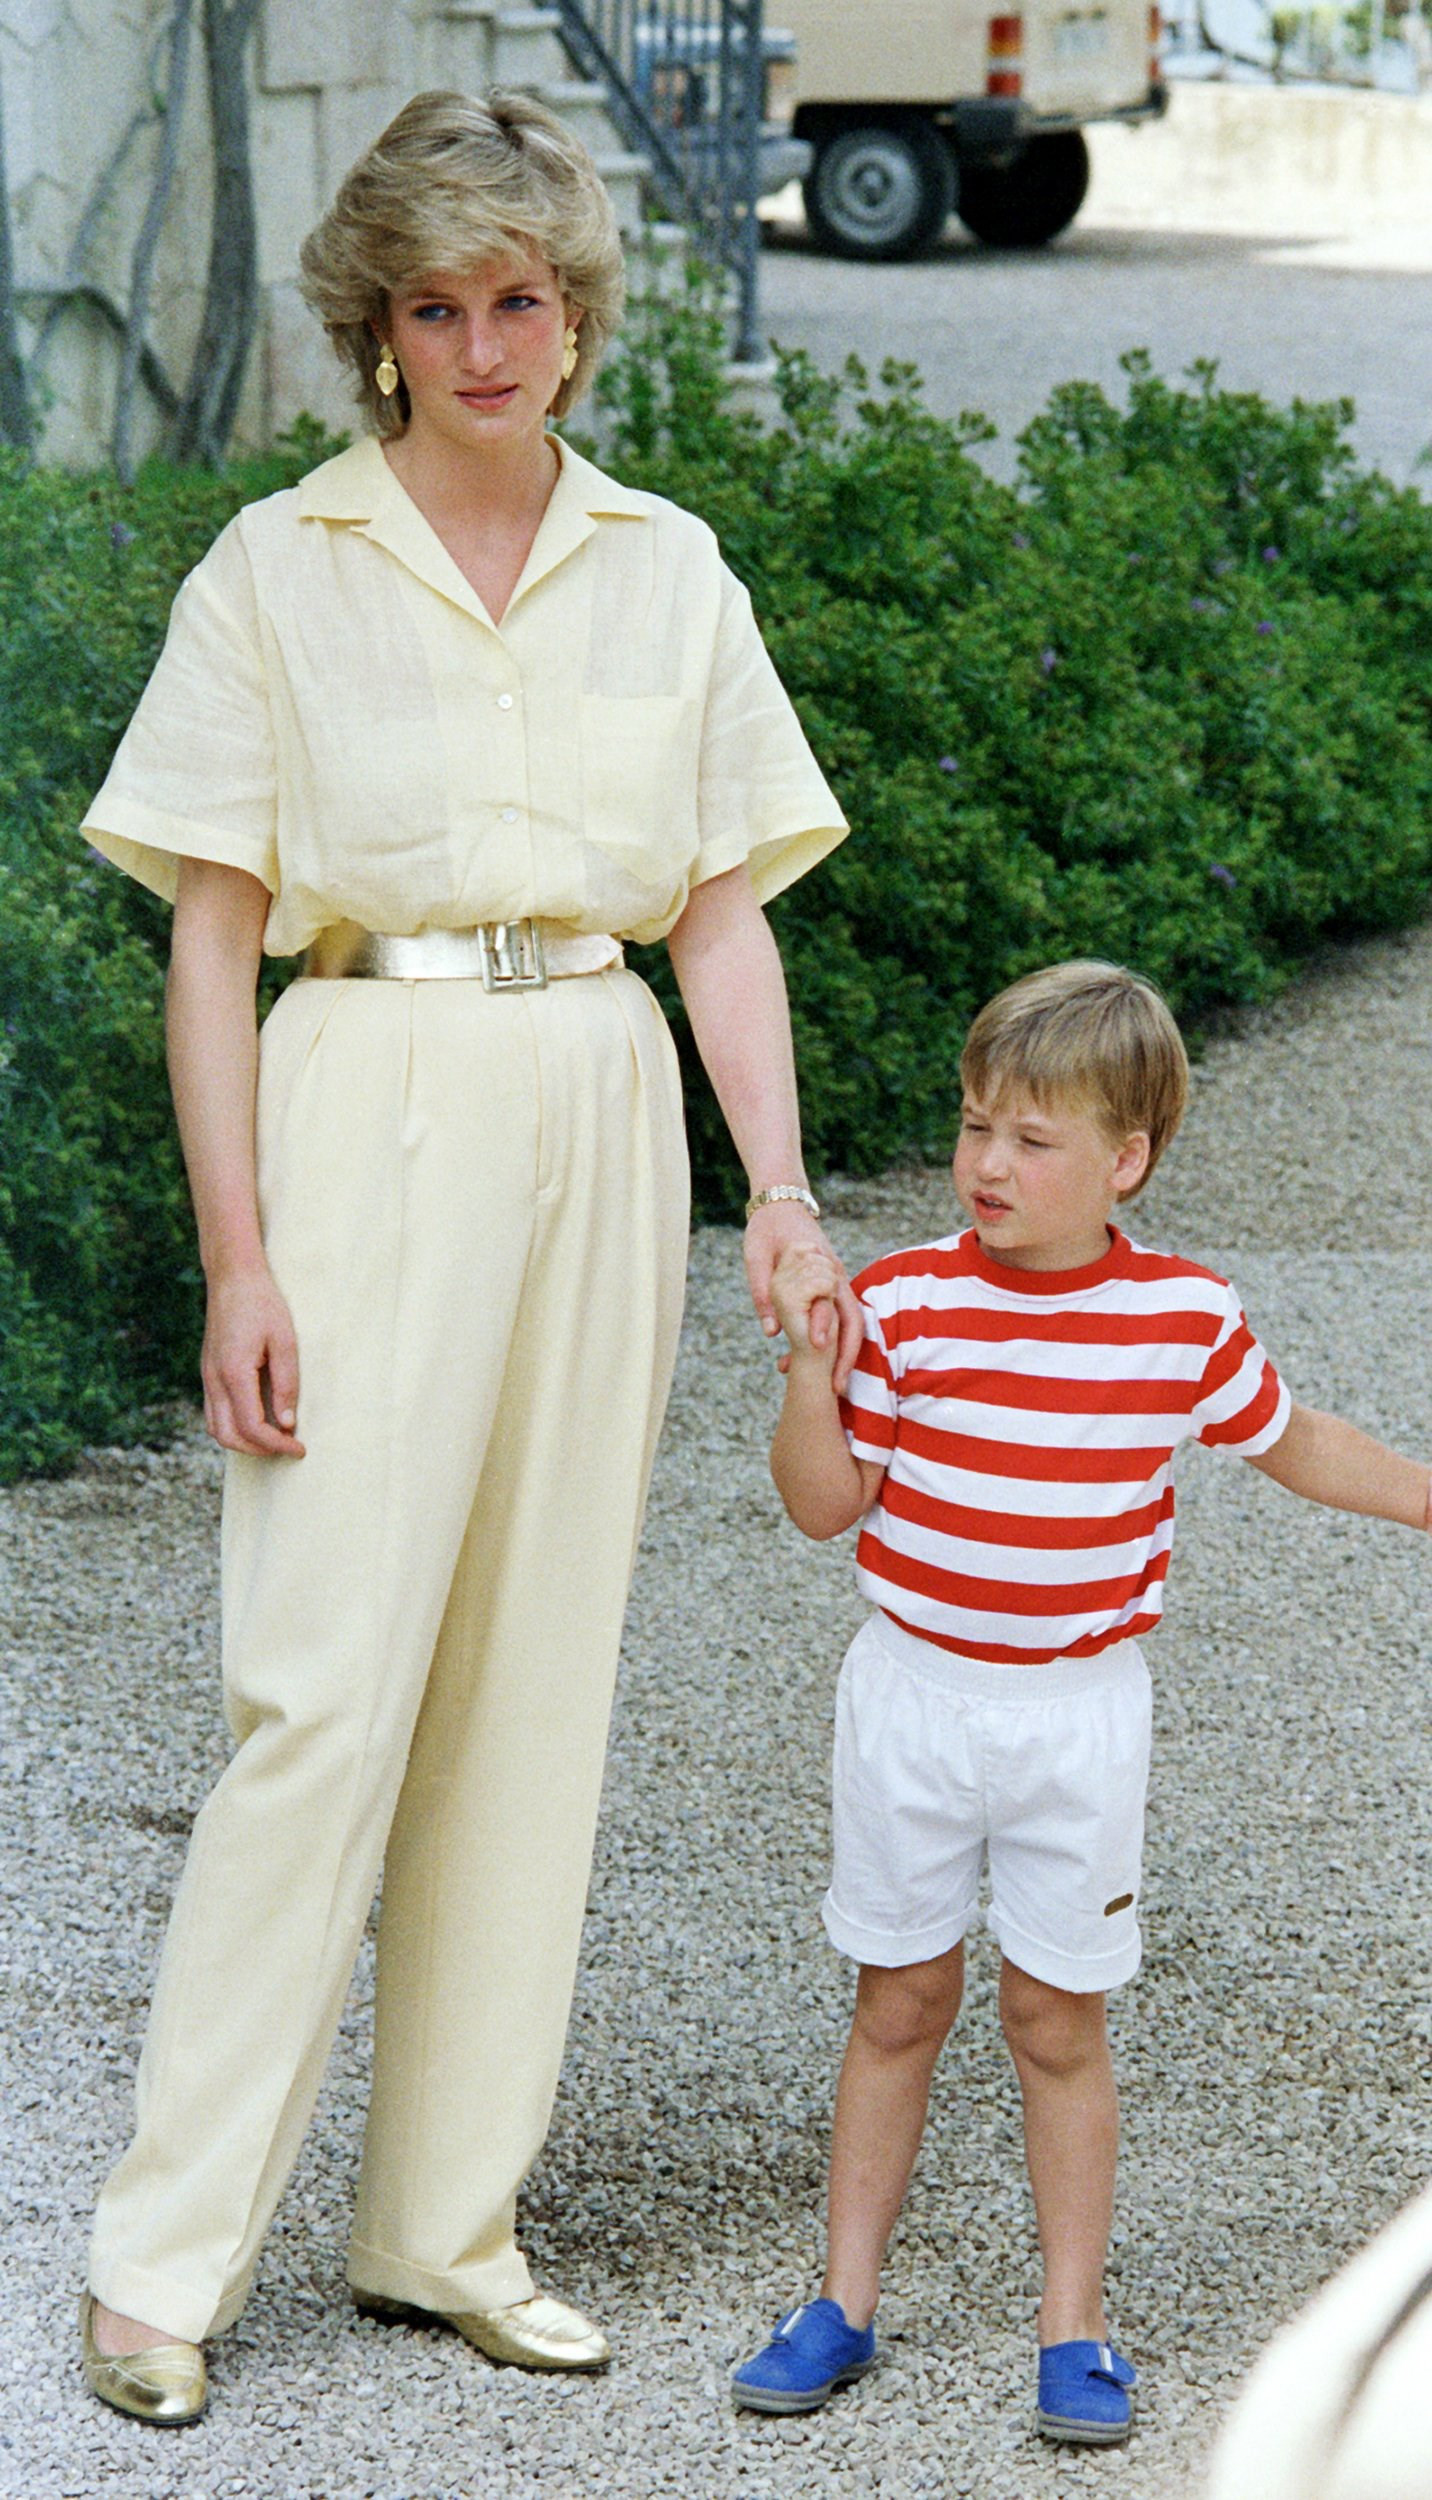 Prince William says his grief over his mum, Princess Diana